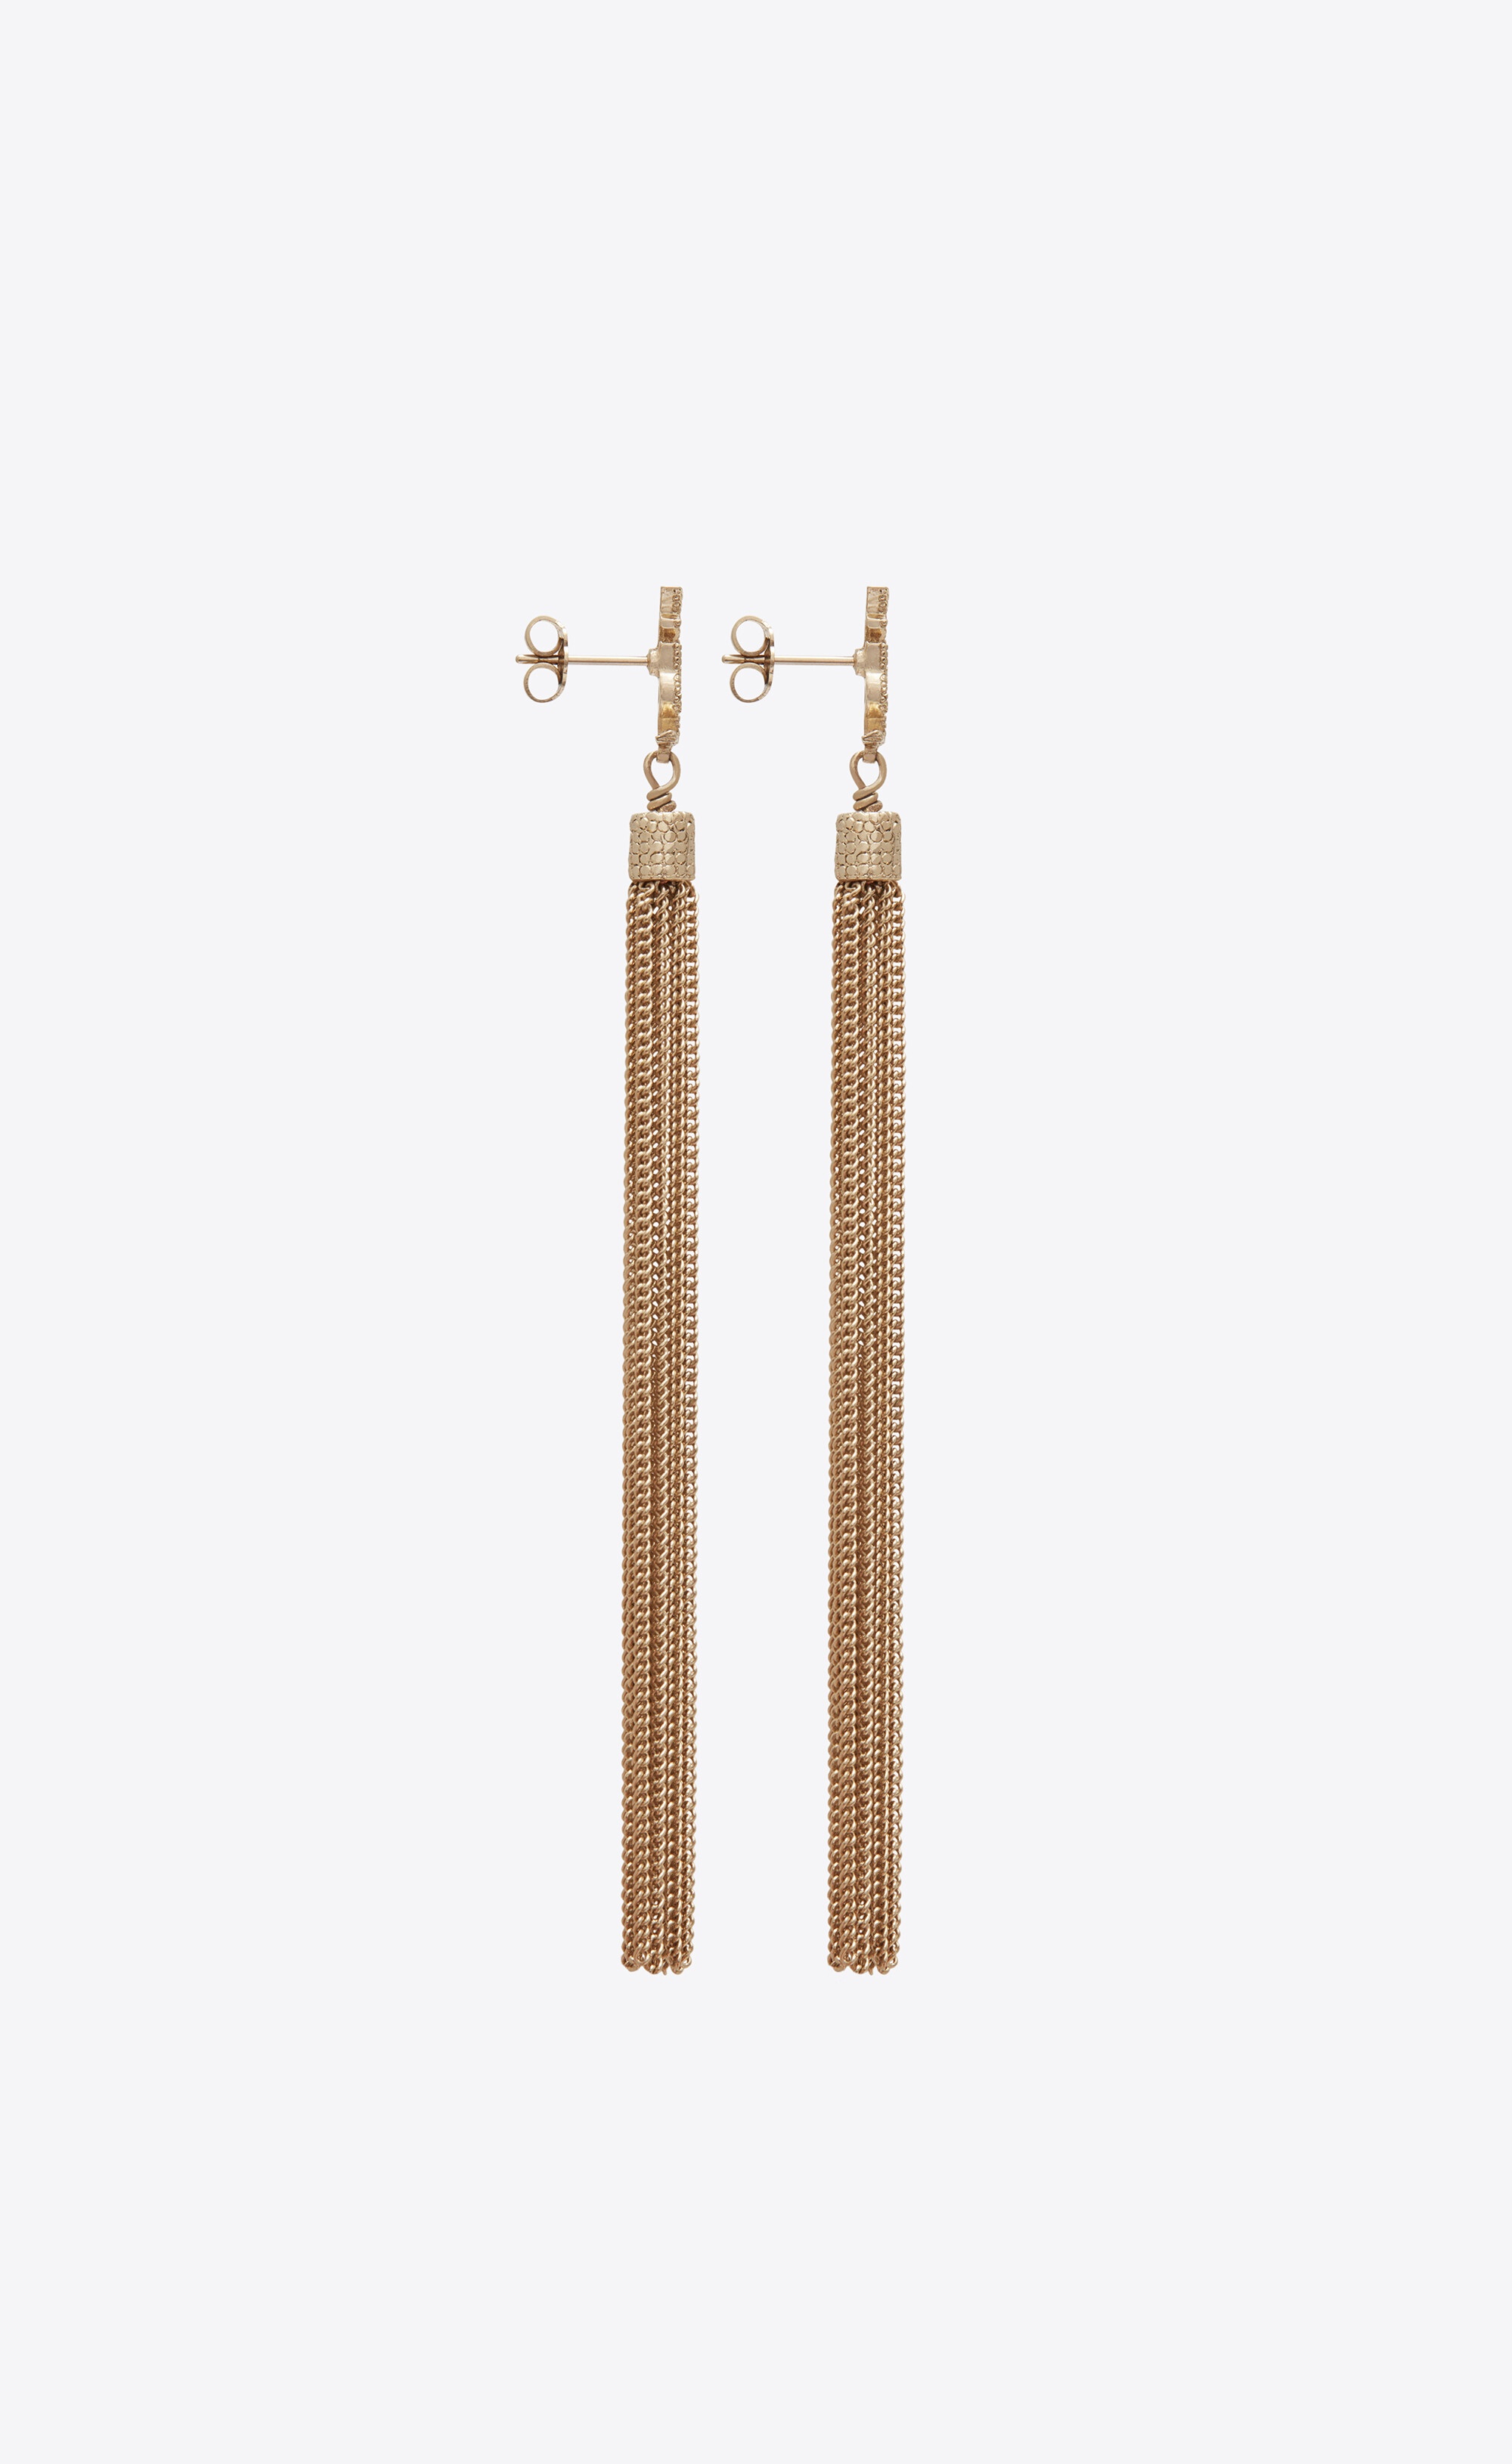 loulou earrings with chain tassels in light gold-colored brass - 3